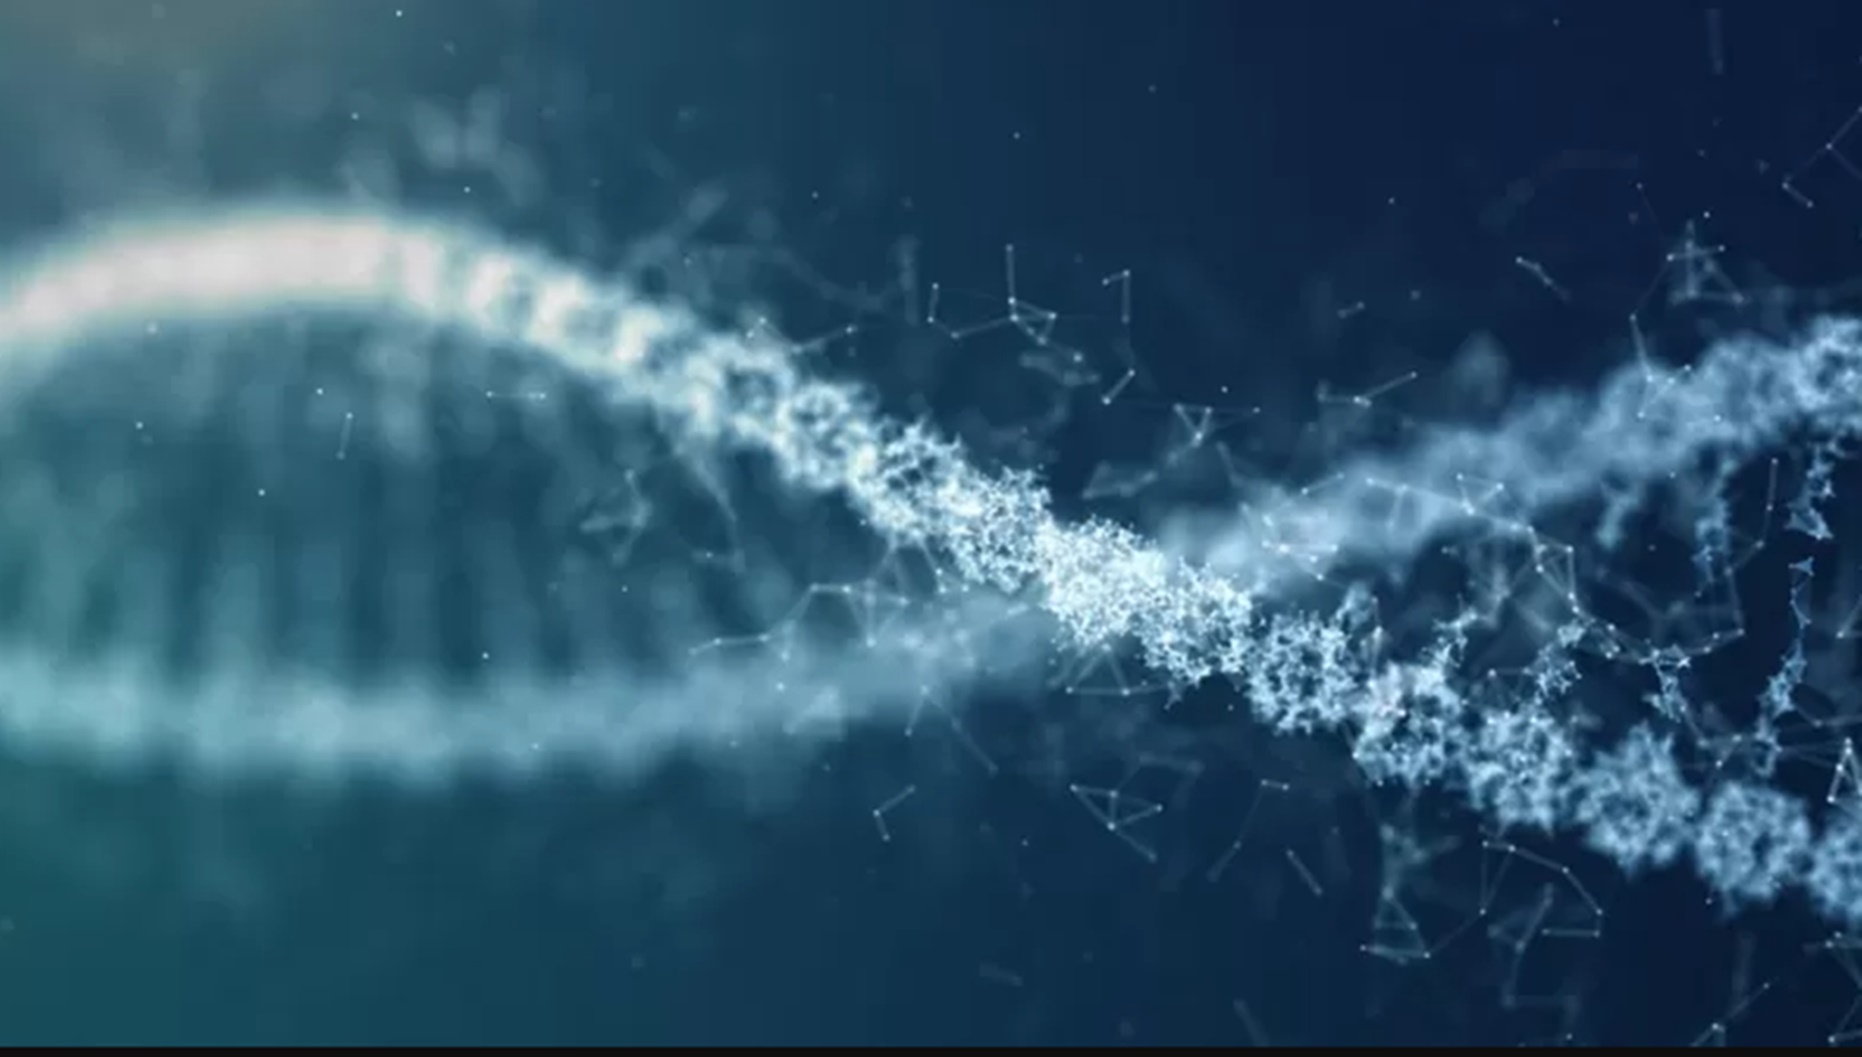 What did you reveal?  They have decoded the first complete sequence of the human genome